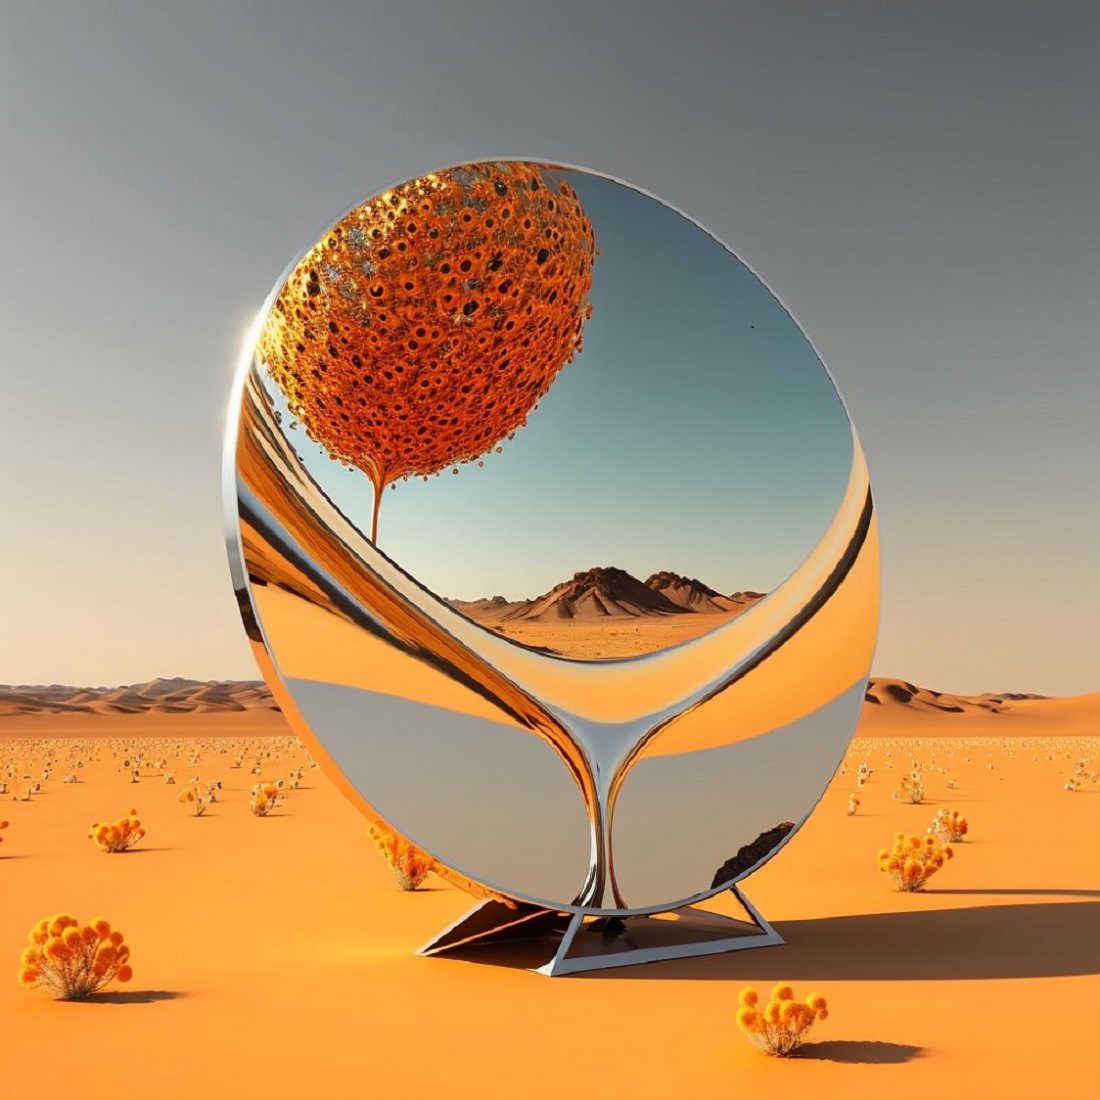 Mirror subjects in the desert Abstraction preview image.